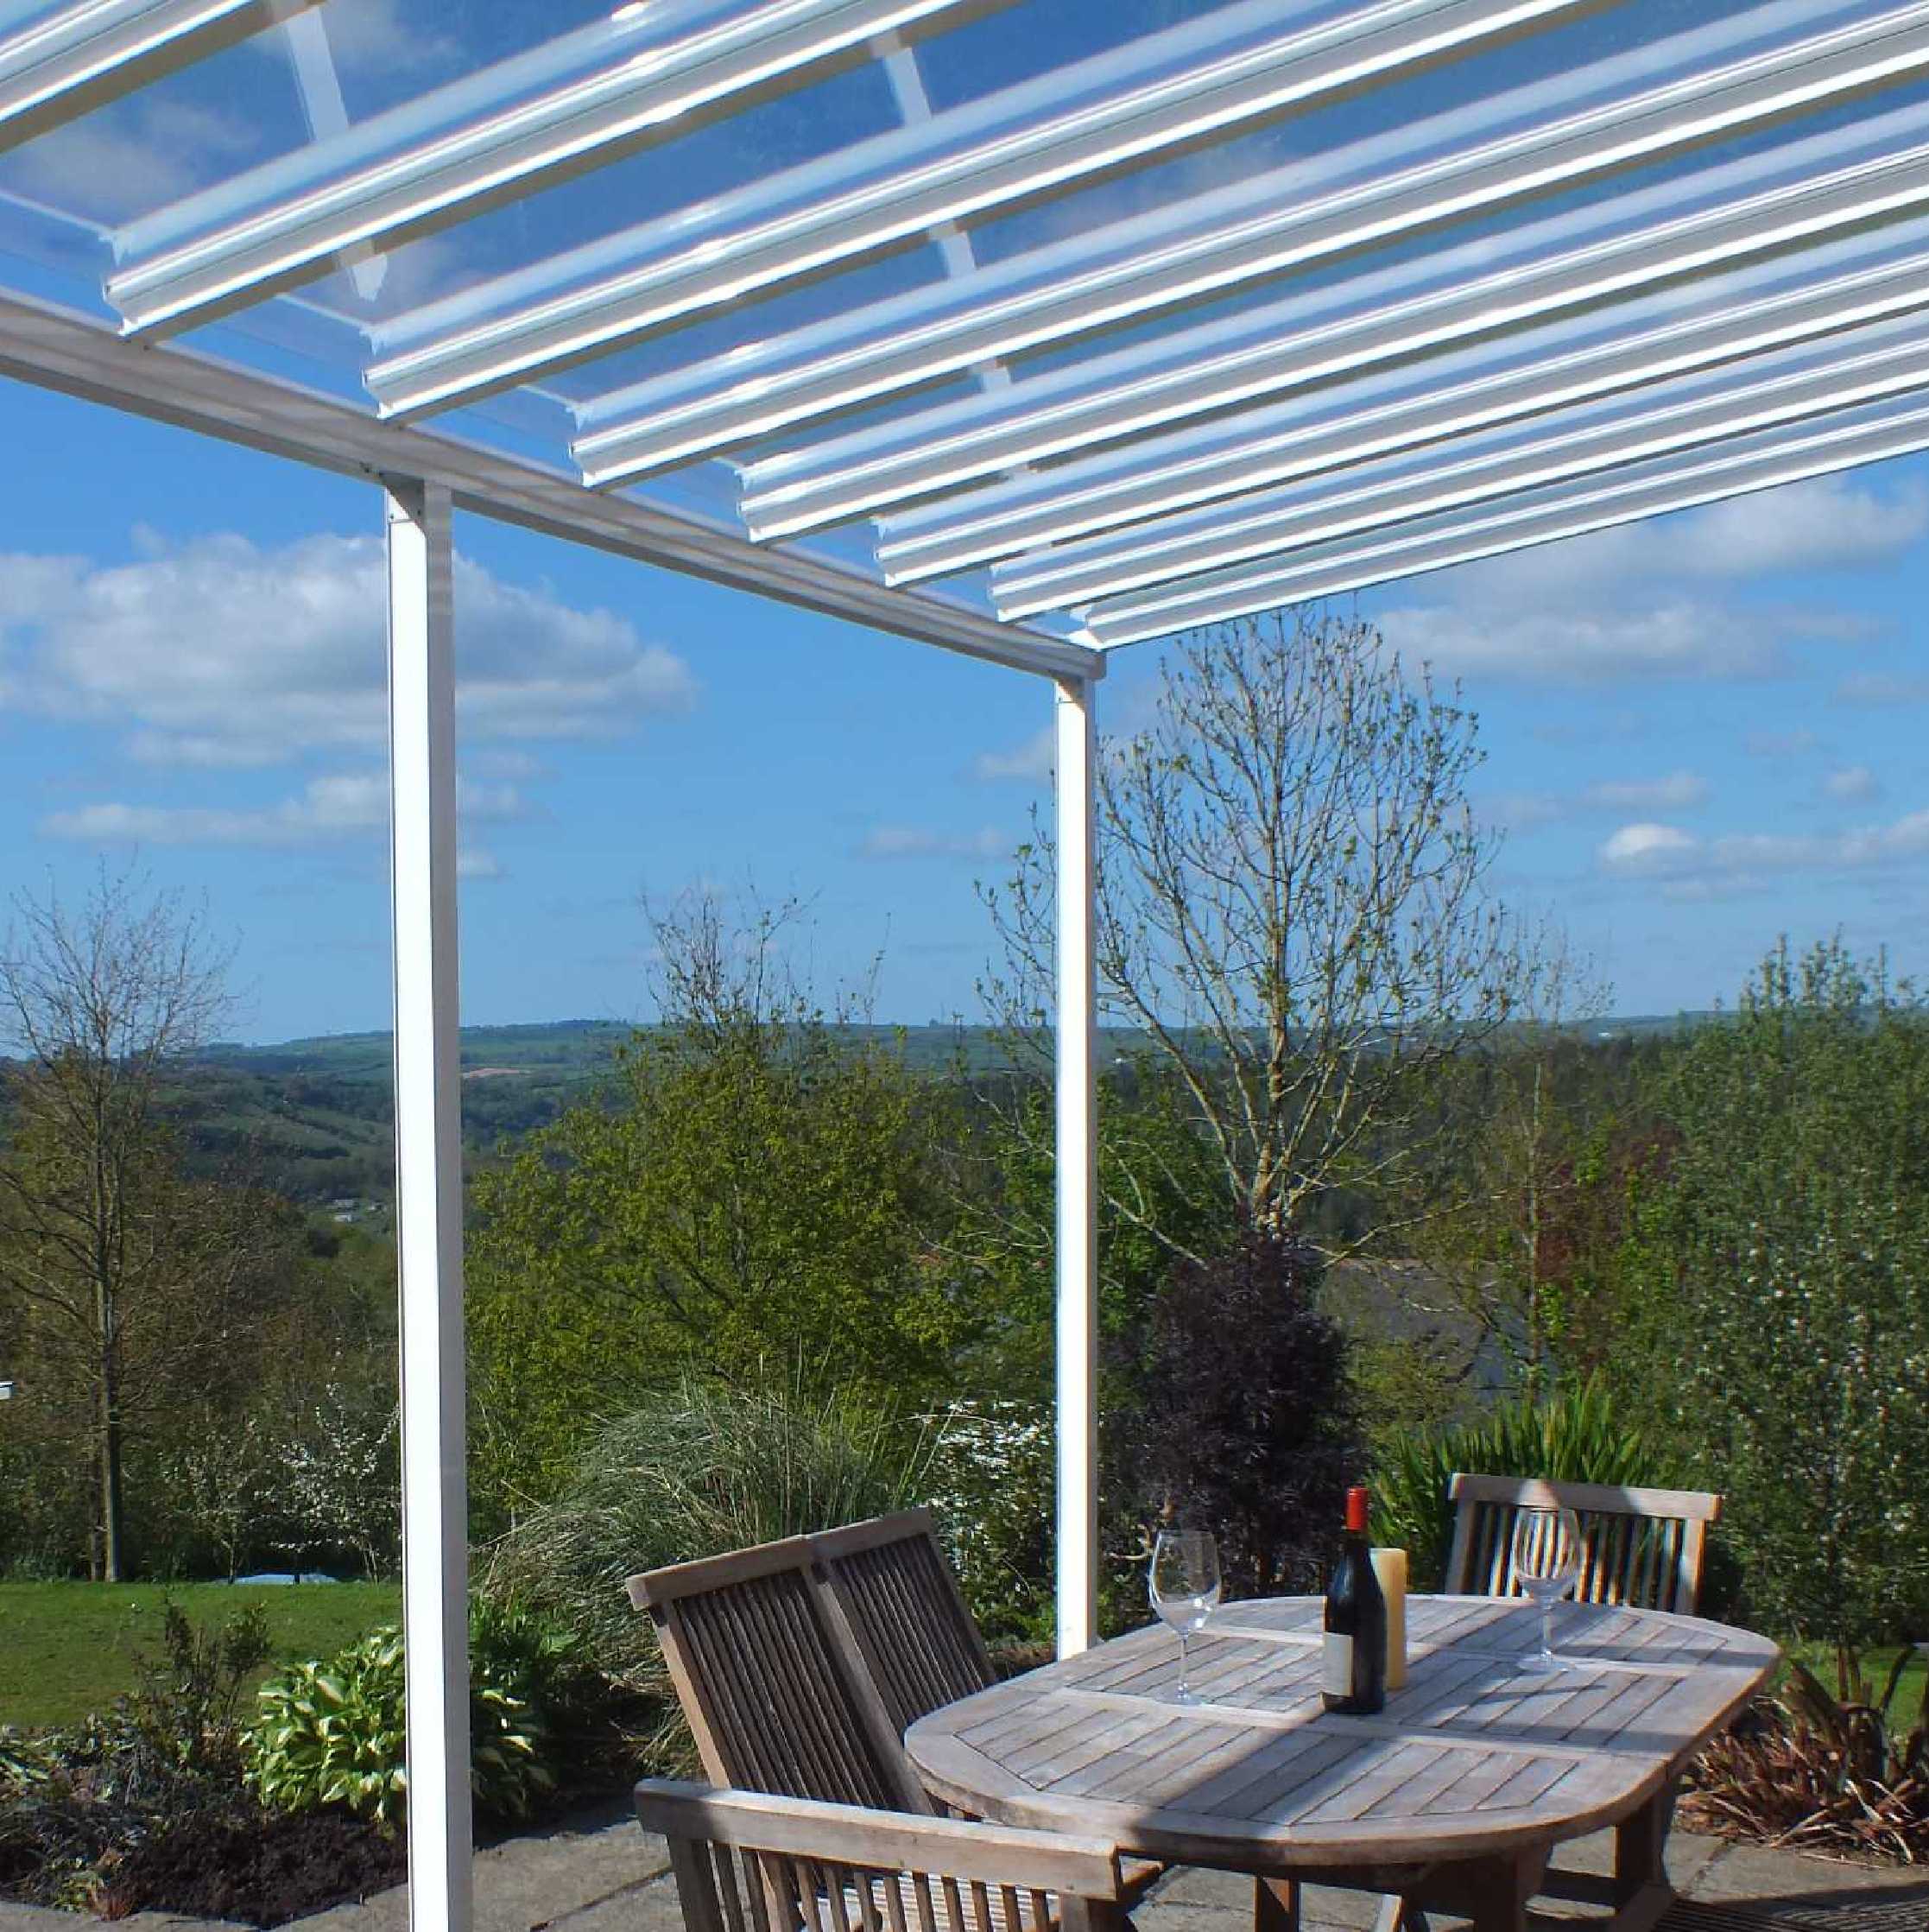 Buy Omega Smart Lean-To Canopy, White with 6mm Glass Clear Plate Polycarbonate Glazing - 9.8m (W) x 2.0m (P), (5) Supporting Posts online today